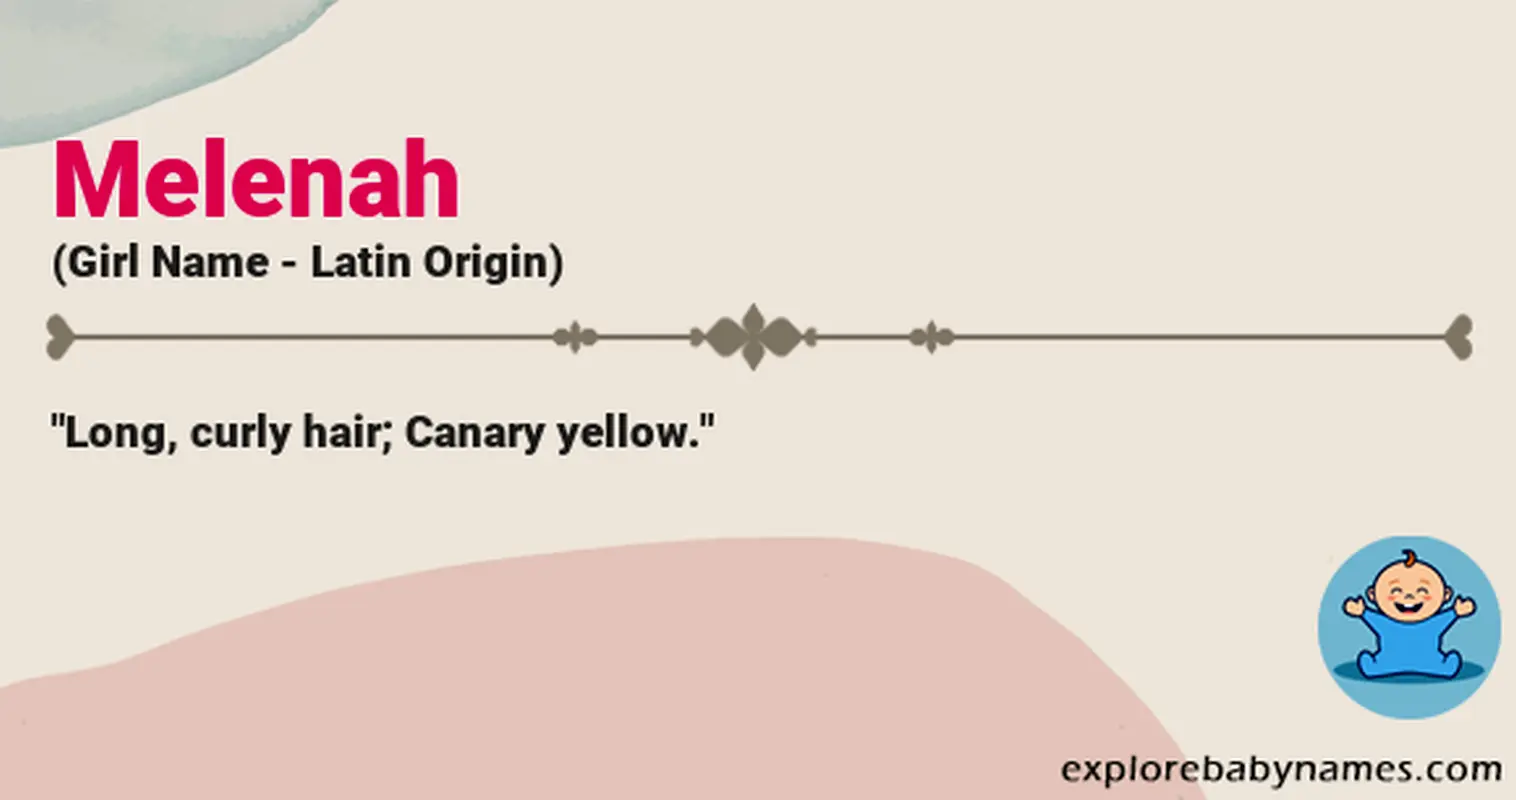 Meaning of Melenah